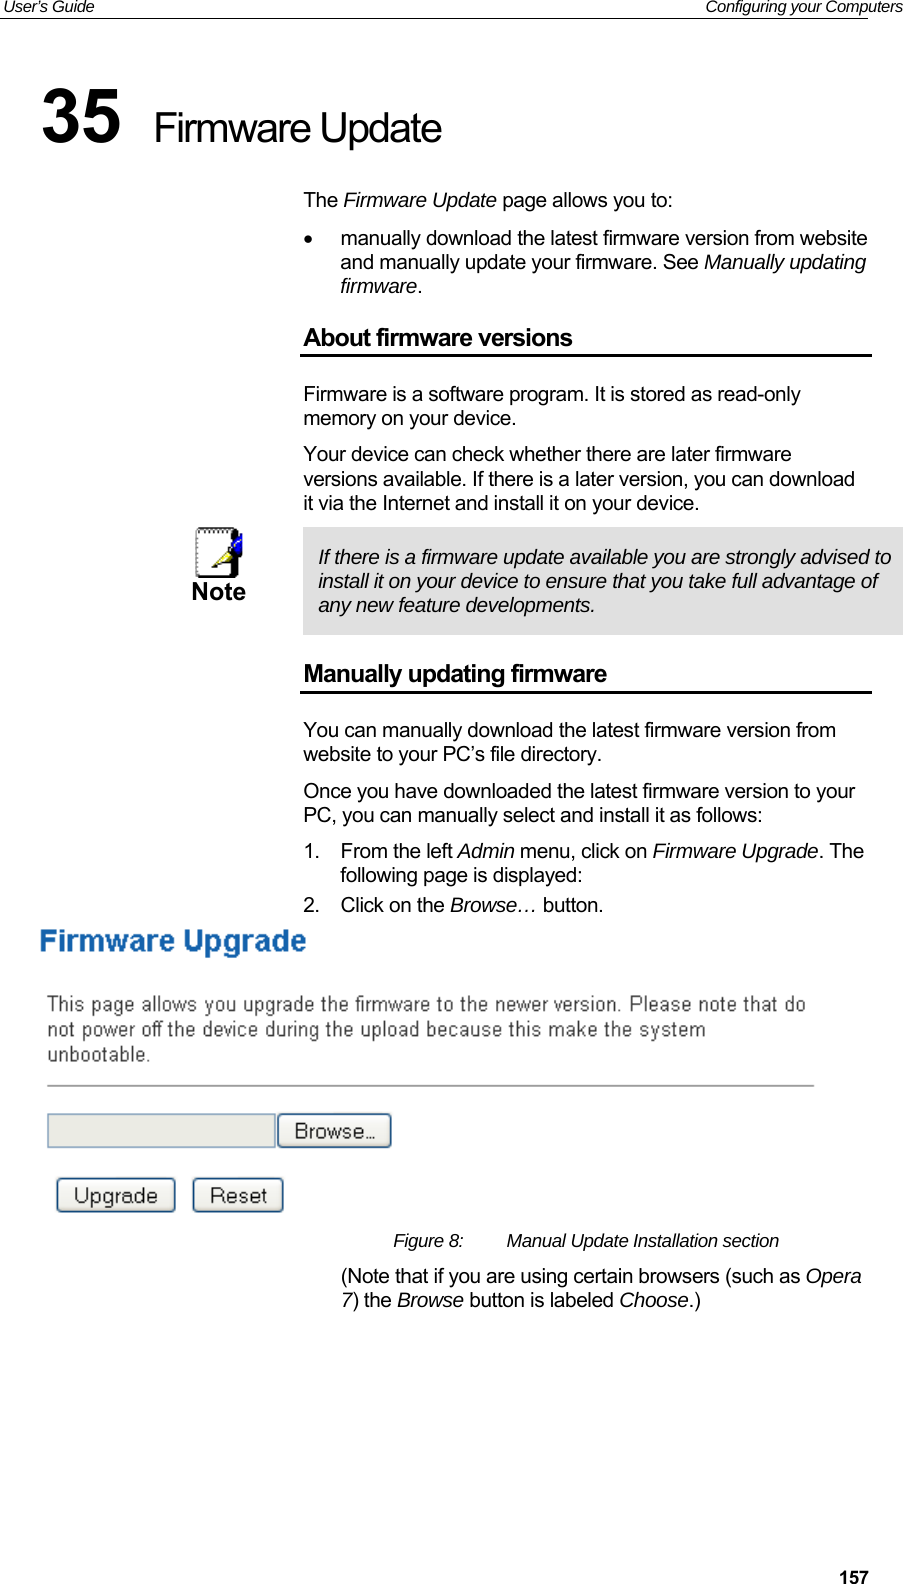 User’s Guide   Configuring your Computers  15735  Firmware Update The Firmware Update page allows you to:   manually download the latest firmware version from website and manually update your firmware. See Manually updating firmware. About firmware versions Firmware is a software program. It is stored as read-only memory on your device. Your device can check whether there are later firmware versions available. If there is a later version, you can download it via the Internet and install it on your device.  Note  If there is a firmware update available you are strongly advised to install it on your device to ensure that you take full advantage of any new feature developments. Manually updating firmware You can manually download the latest firmware version from website to your PC’s file directory.  Once you have downloaded the latest firmware version to your PC, you can manually select and install it as follows: 1.  From the left Admin menu, click on Firmware Upgrade. The following page is displayed: 2.  Click on the Browse… button.   Figure 8:  Manual Update Installation section (Note that if you are using certain browsers (such as Opera 7) the Browse button is labeled Choose.)      